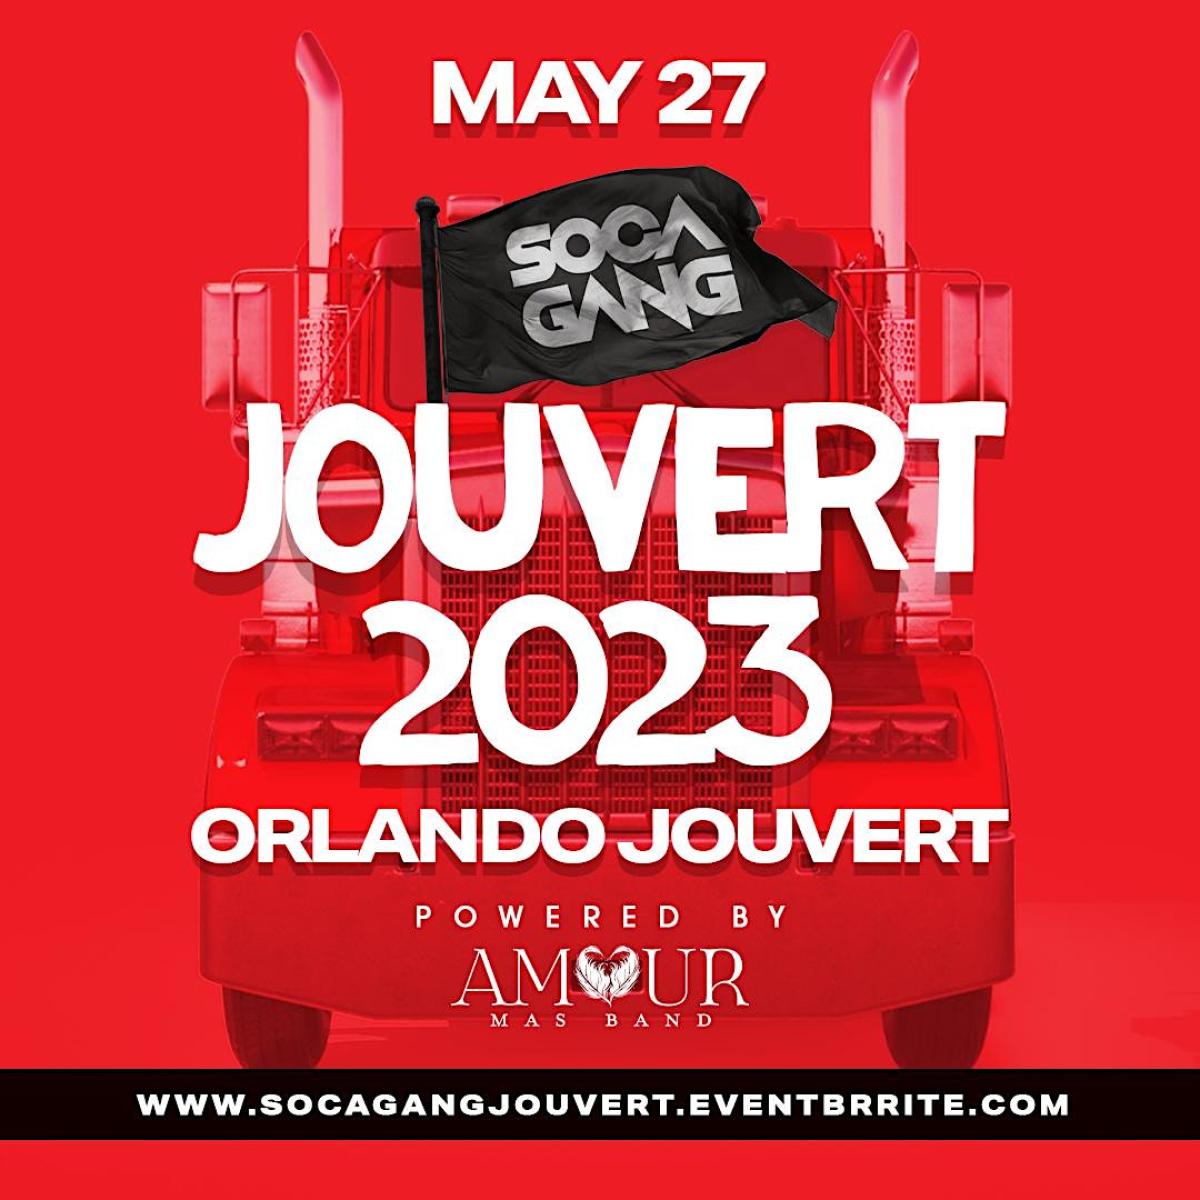 Soca Gang Jouvert flyer or graphic.